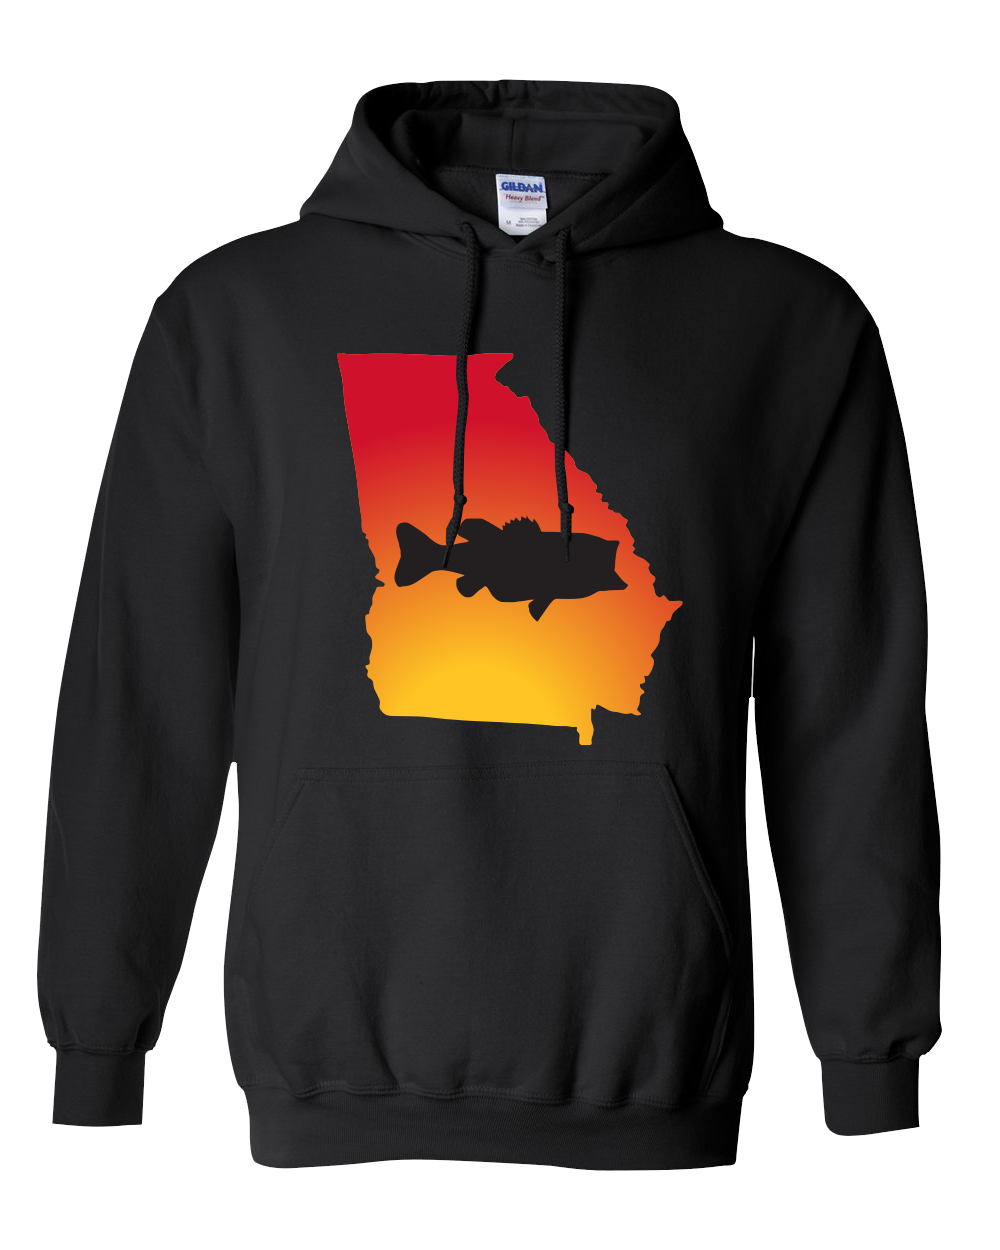 Pullover Hooded Sweatshirt Georgia Black Large Mouth Bass Vibrant Design High Quality Tight Knit Ring Spun Low Maintenance Cotton Printed With The Newest Available Color Transfer Technology